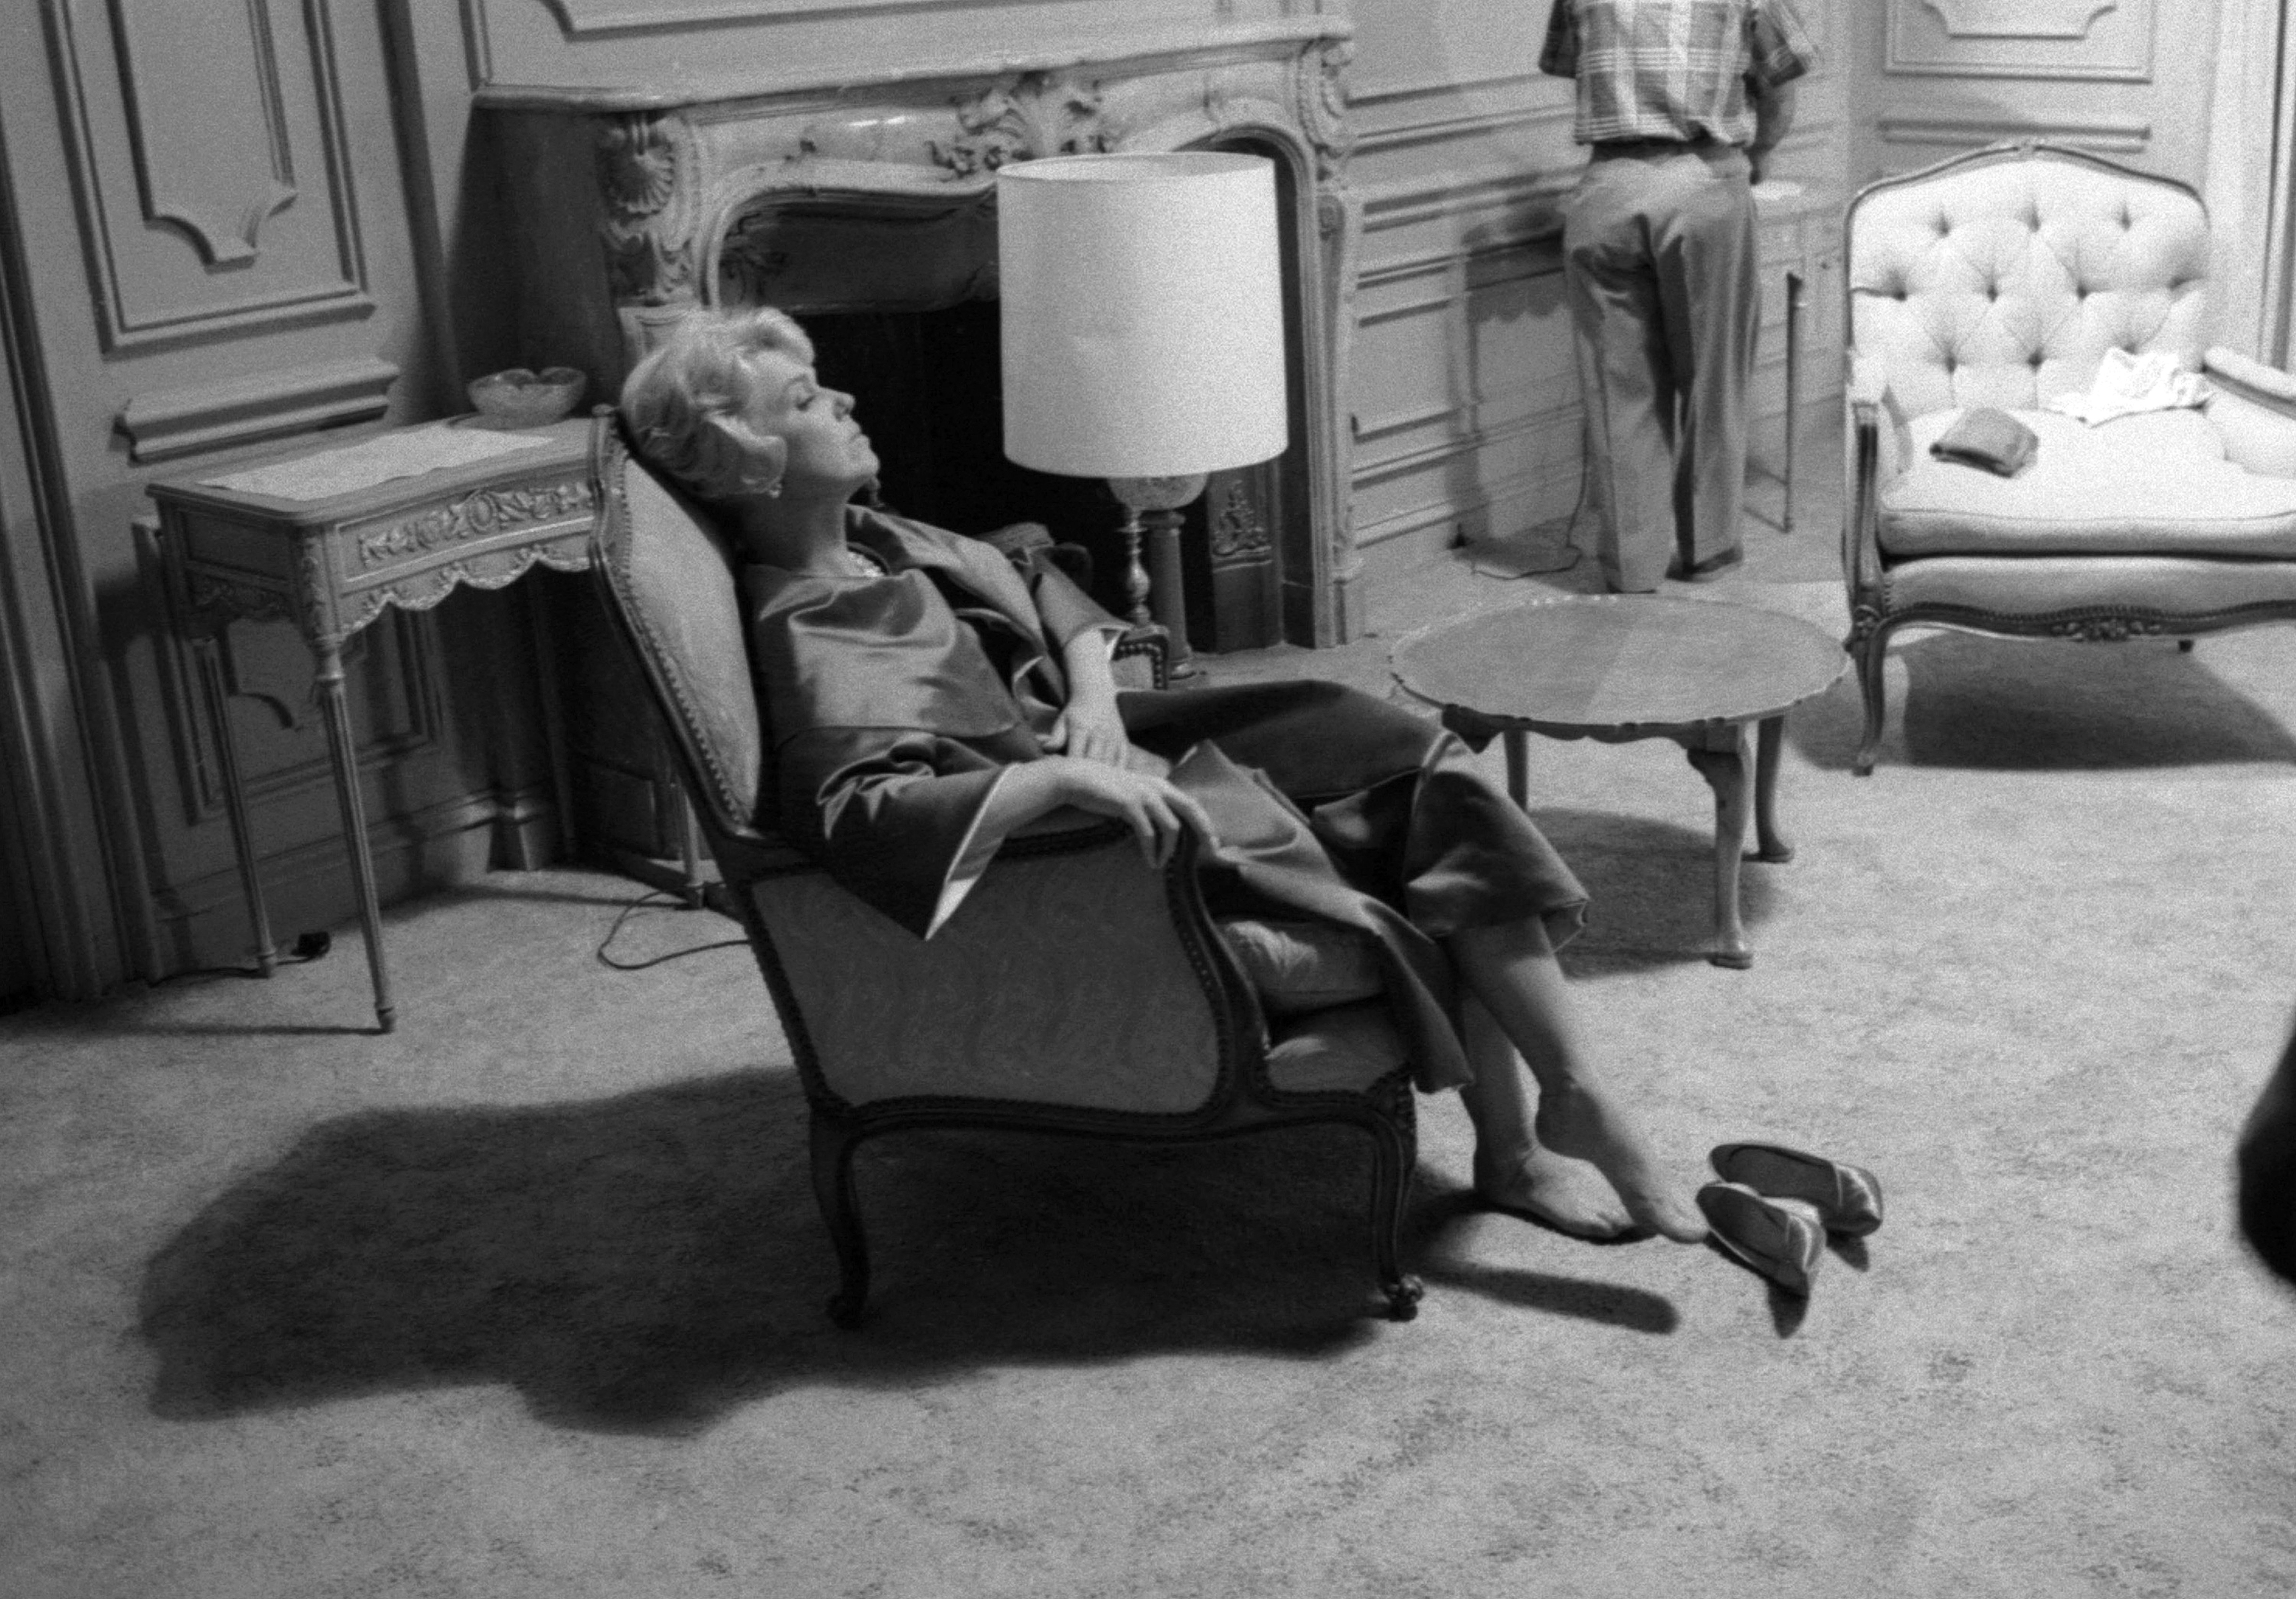 Doris Day captured sitting in a chair with her shoes off in 1959 in Los Angeles. / Source: Getty Images